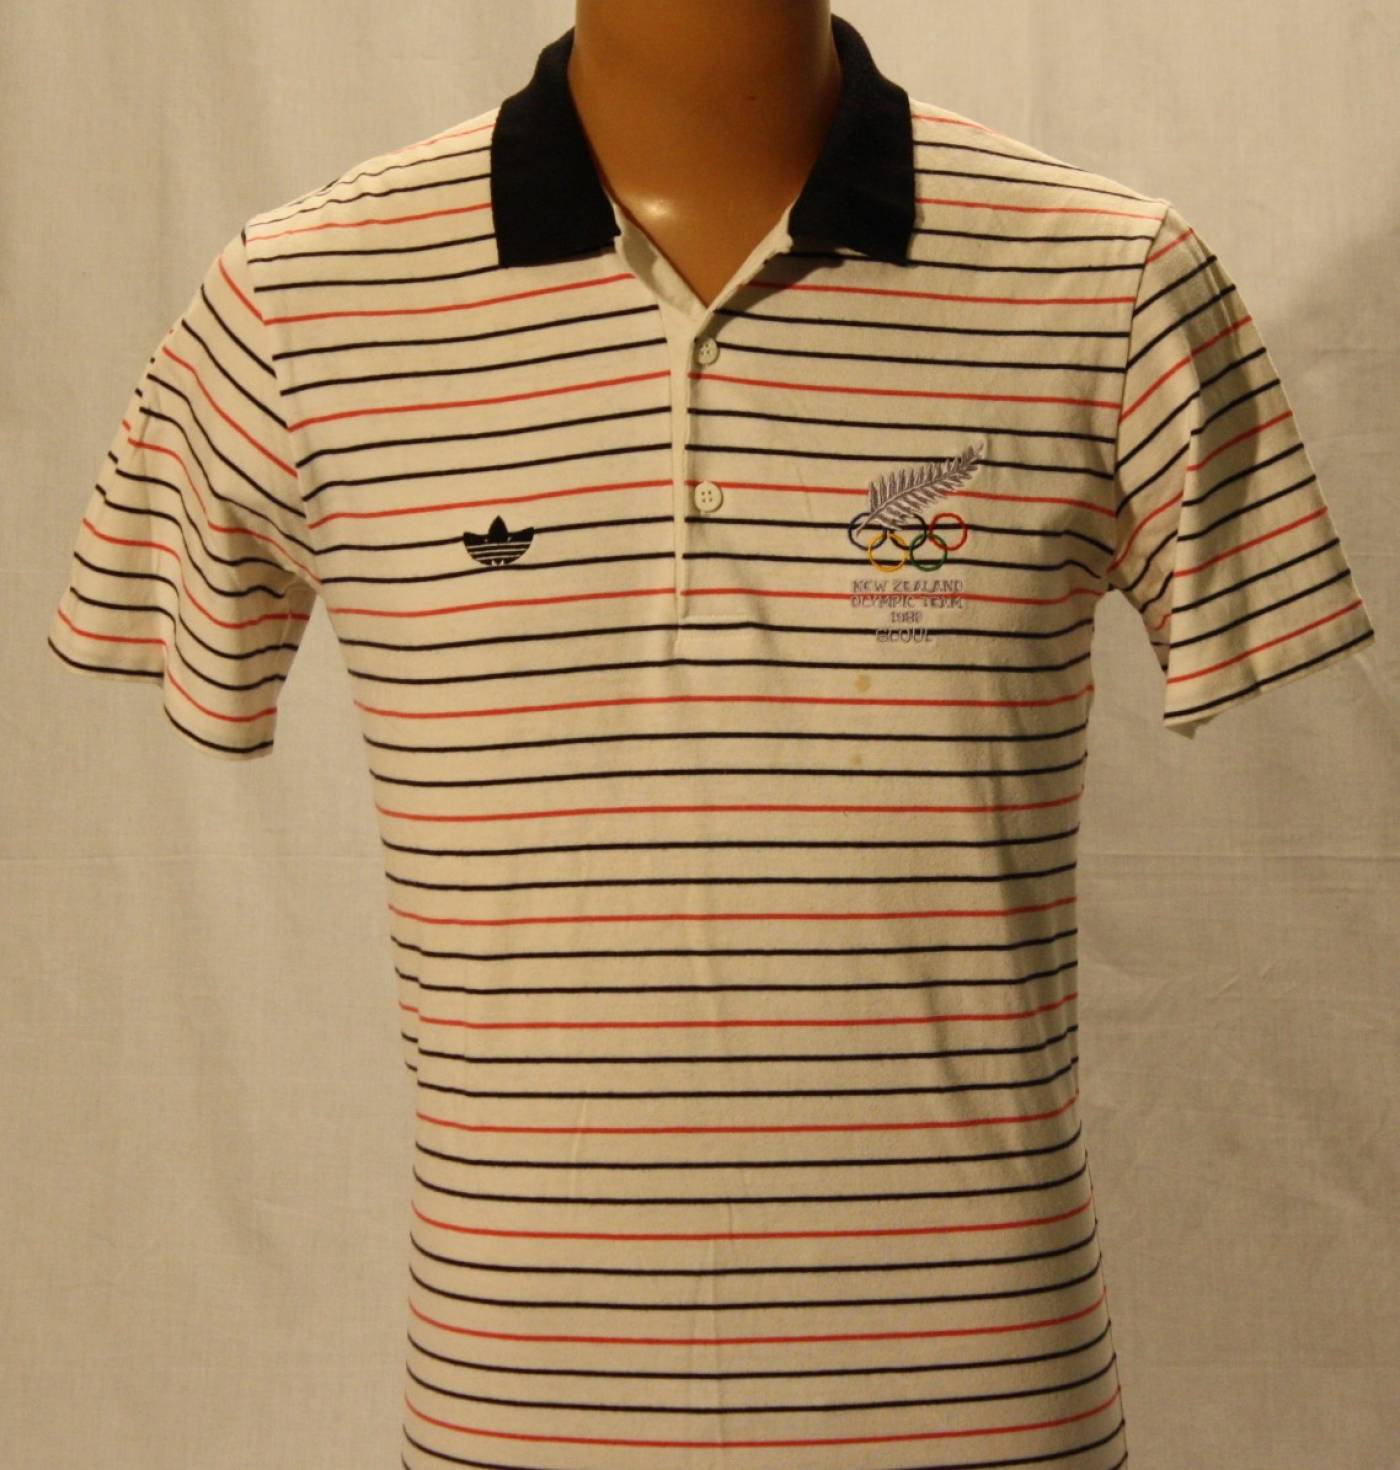 Polo Shirt from the Games of the XXIV Olympiad, Seoul 1988. Photo: New ...